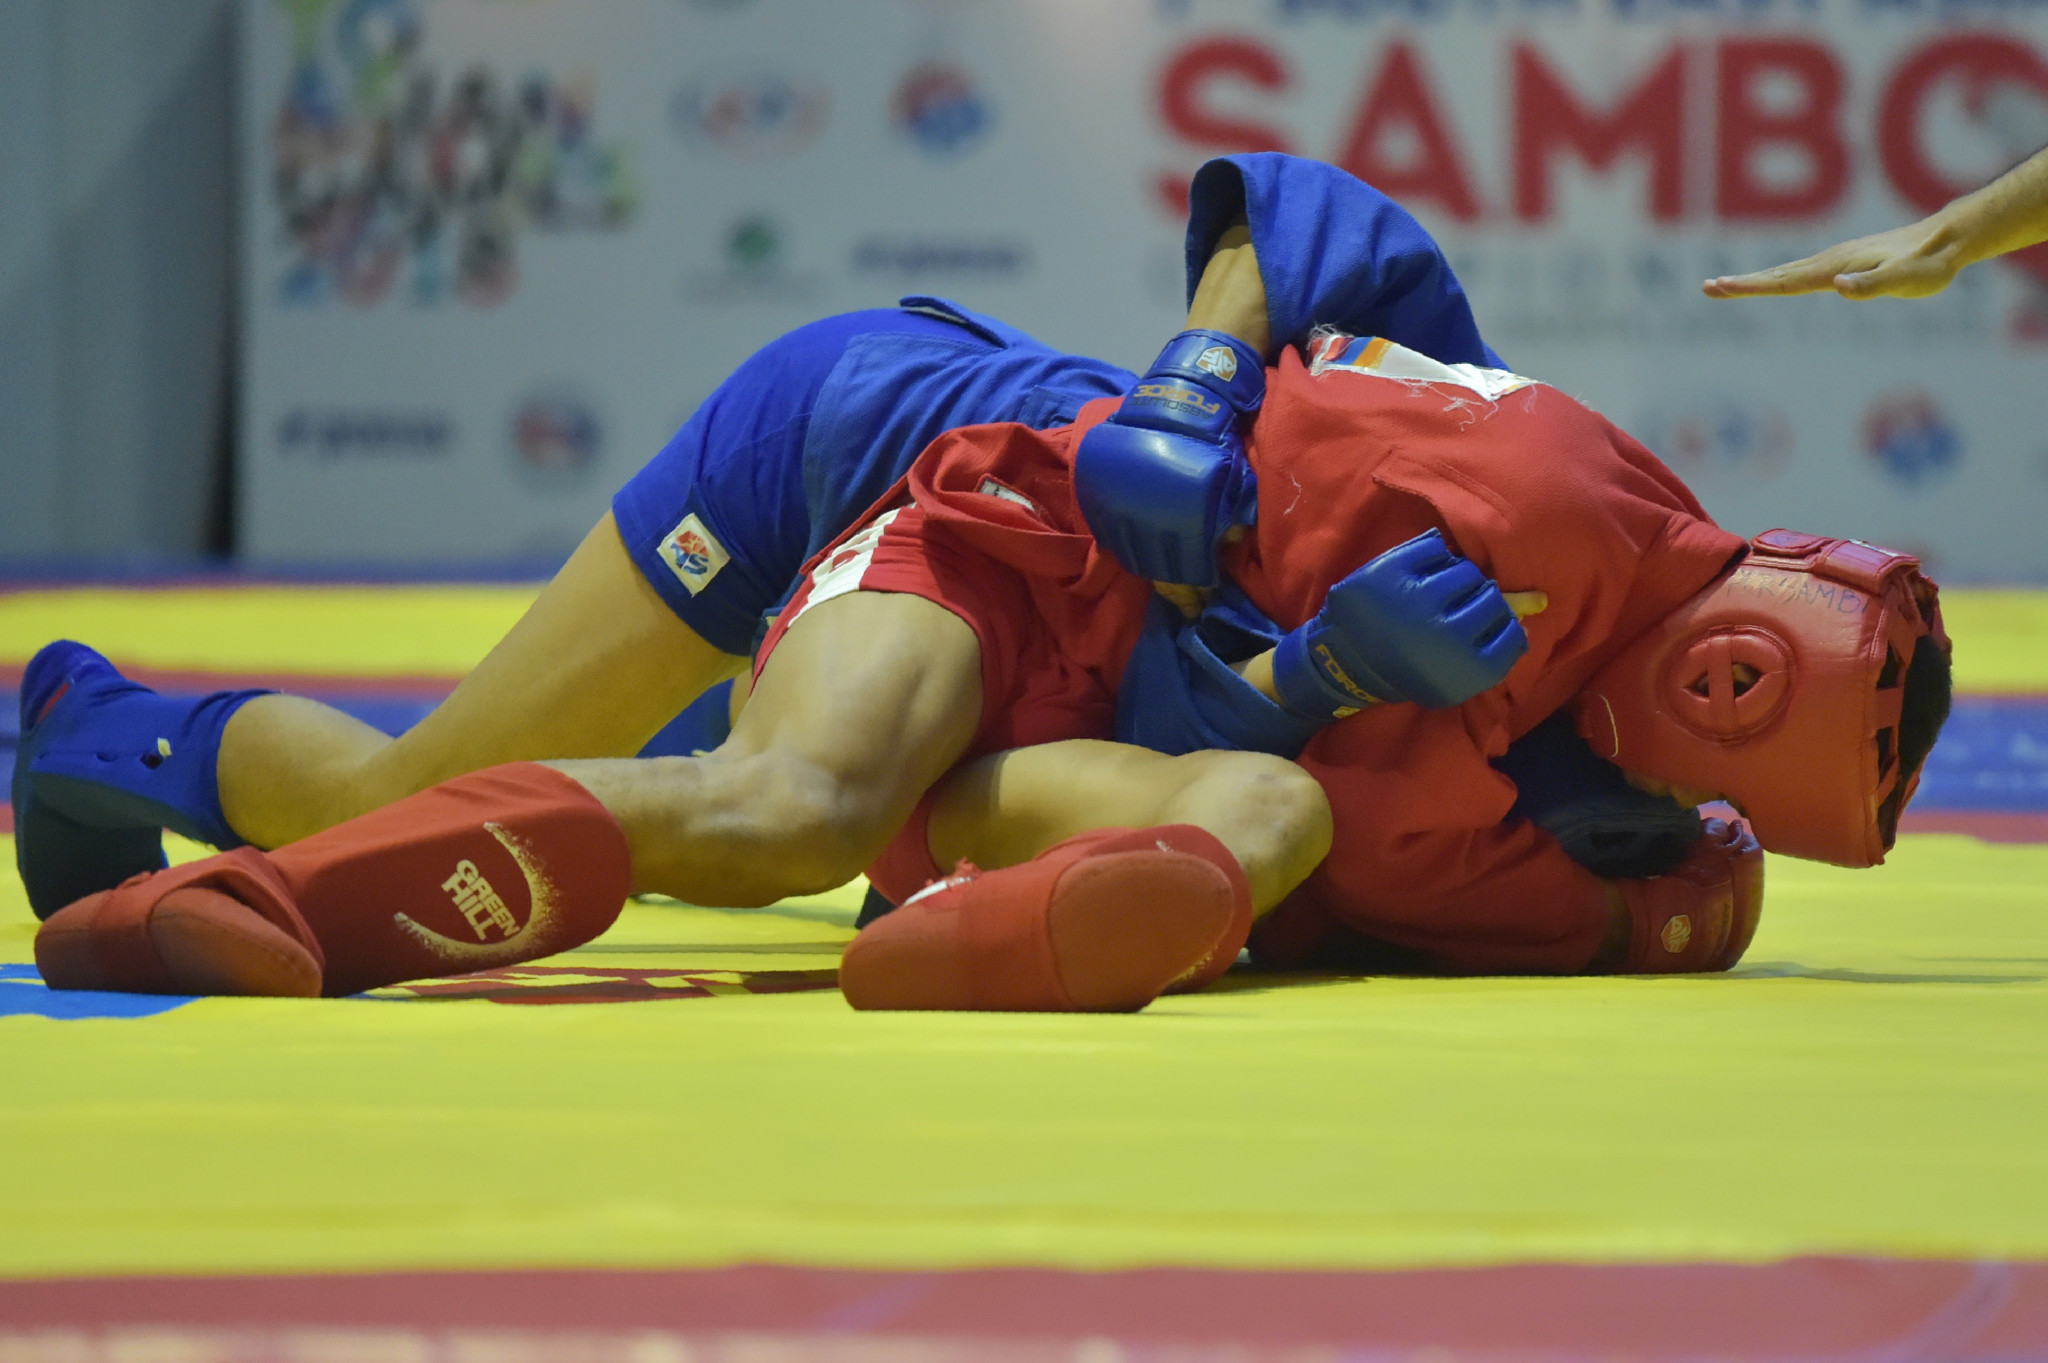 The Judo Sambo Club Honfleur reopened for the first time in more than a year ©Getty Images